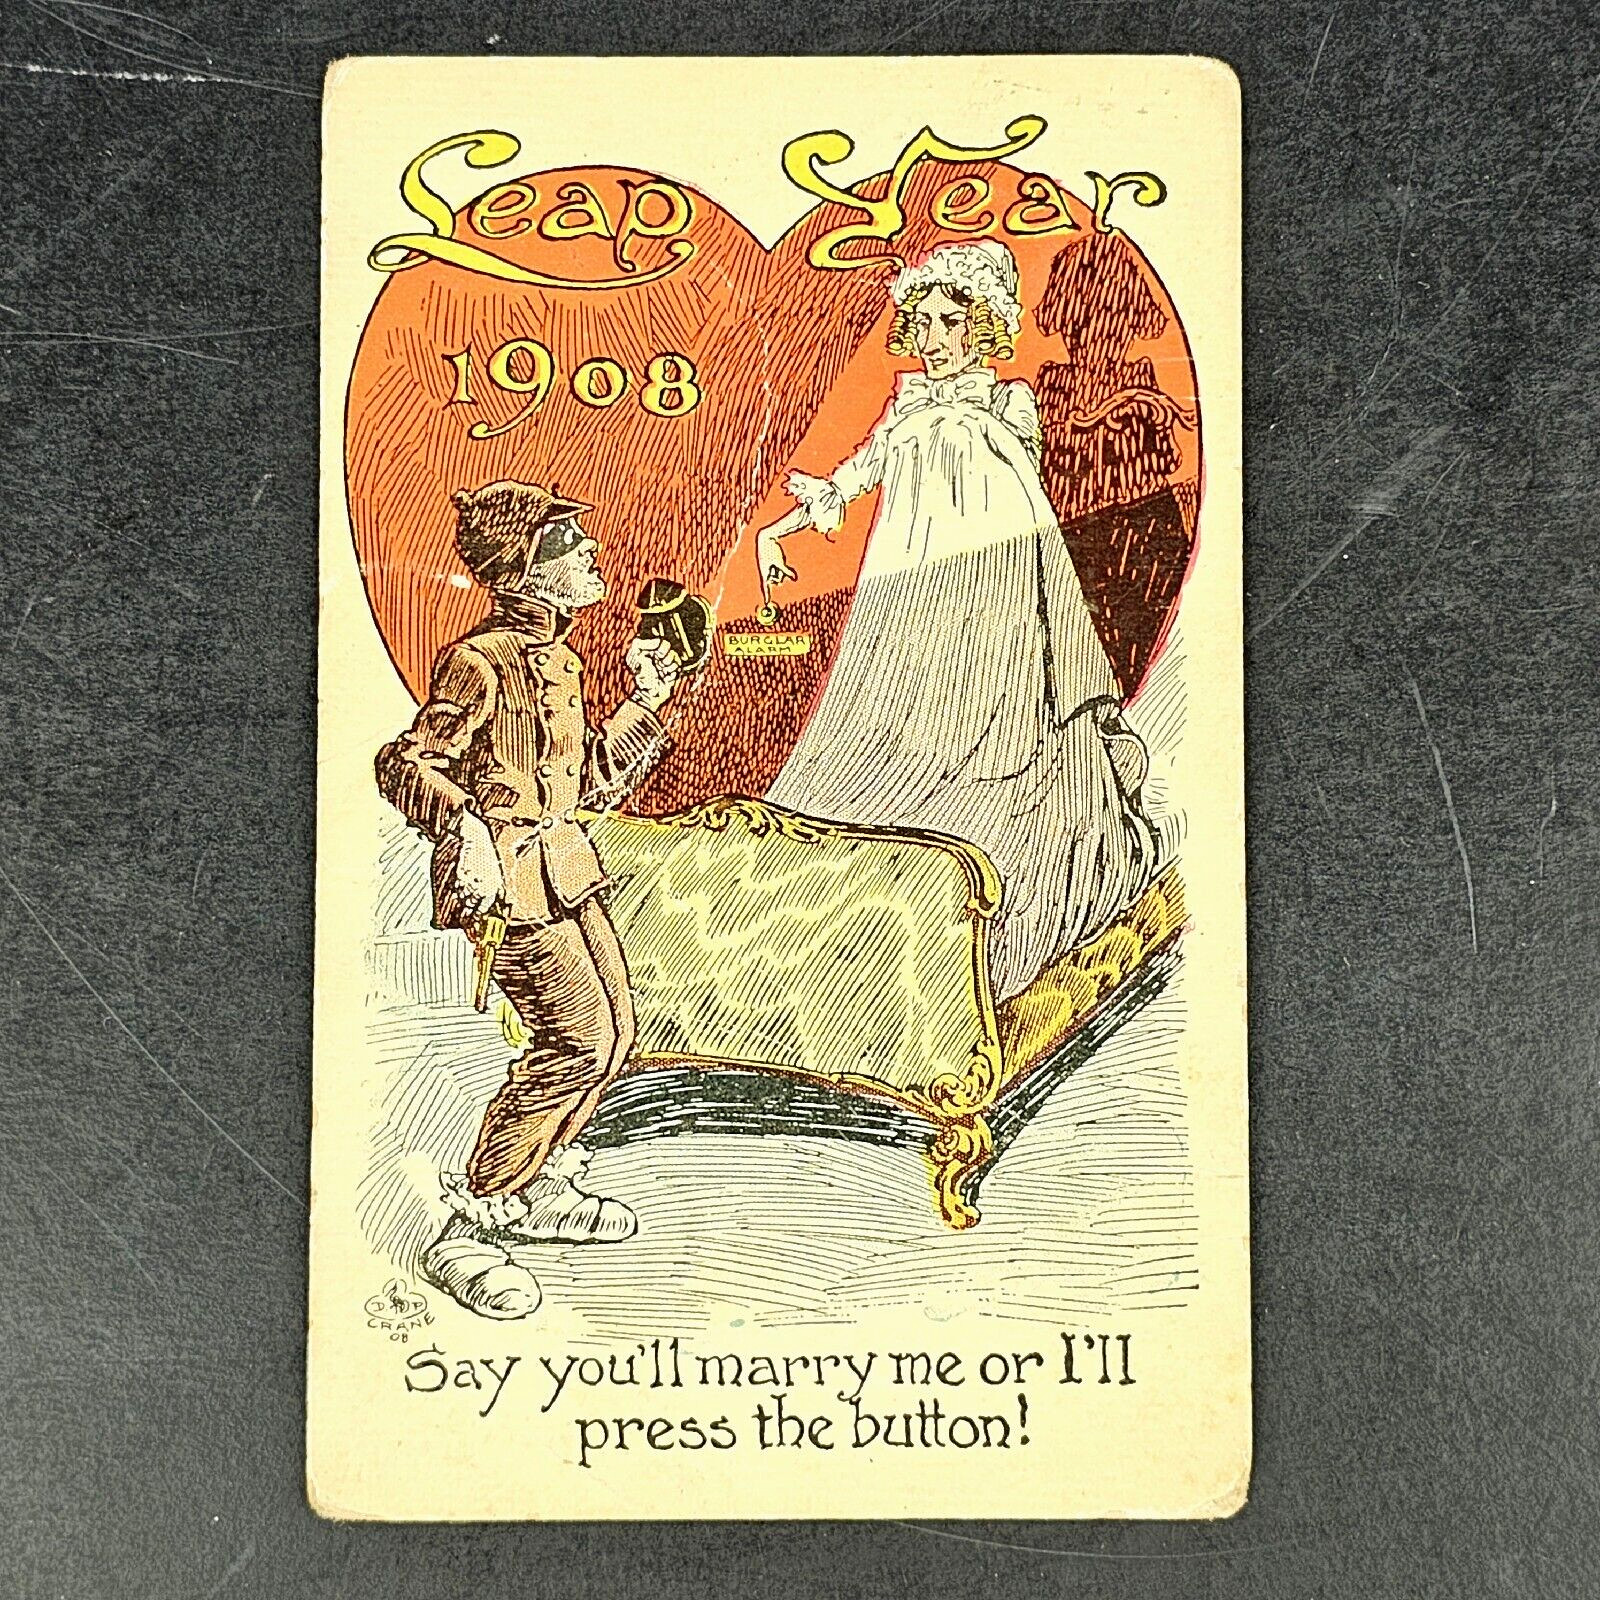 ANTIQUE 1908 D.P. CRANE POST CARD LEAP YEAR ROMANTIC HUMOR COMIC LITHO POSTED